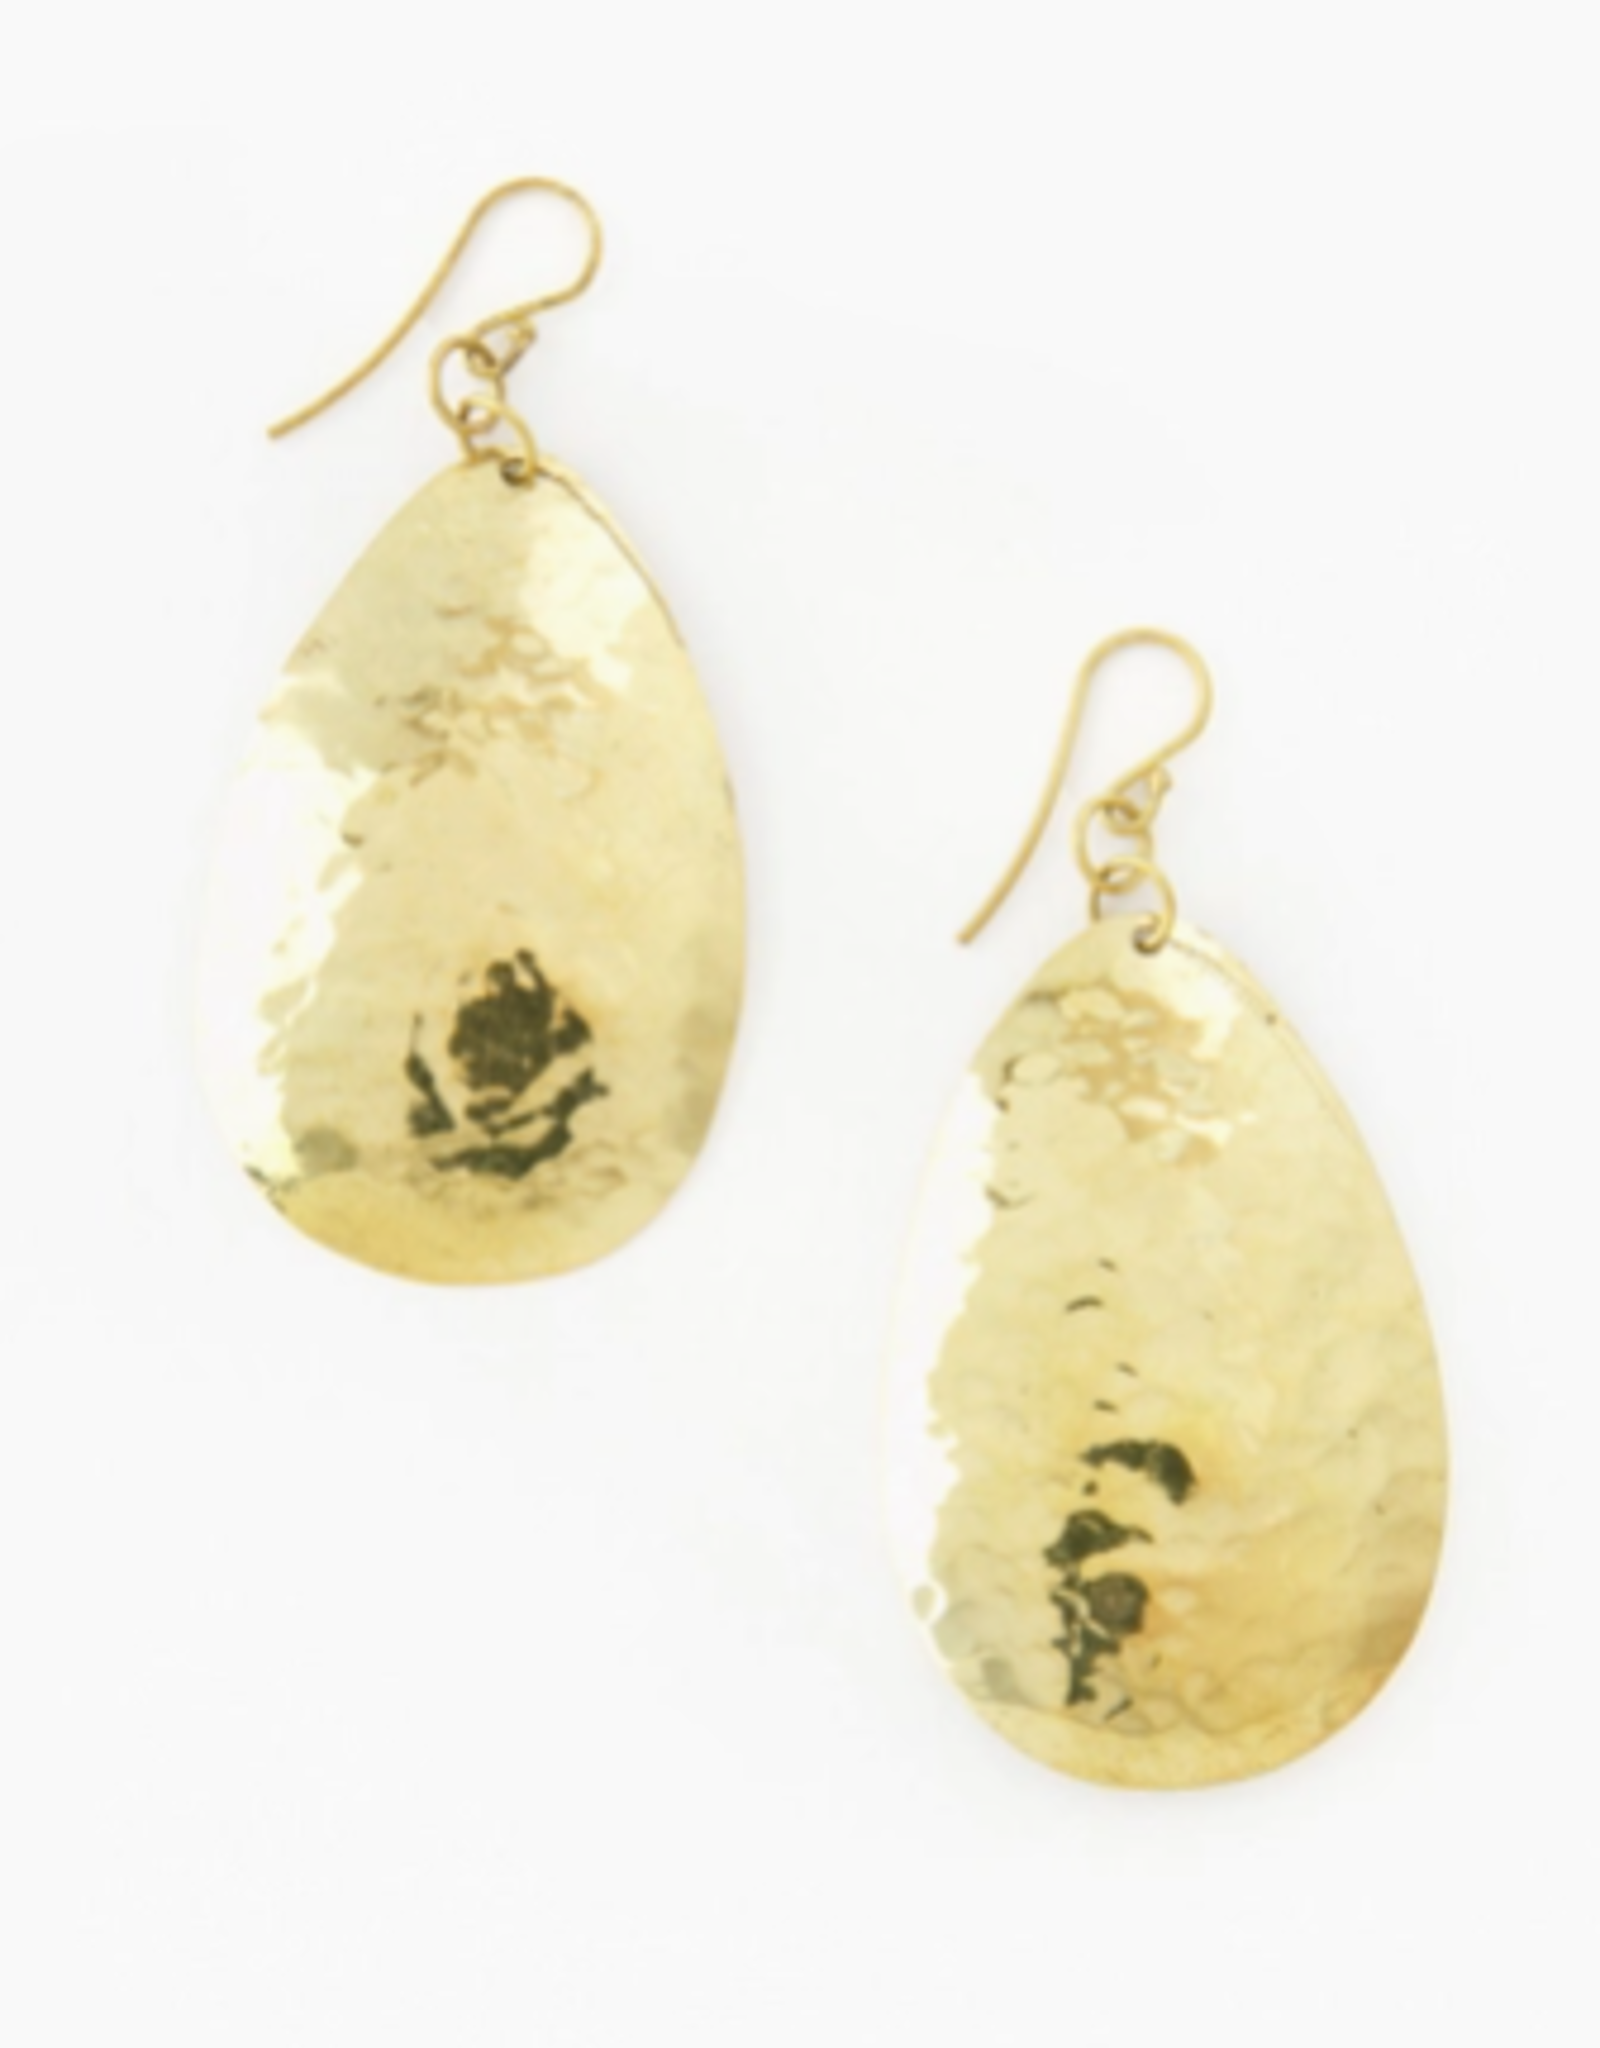 Swahili African Modern Hammered Brass Limelight Earrings